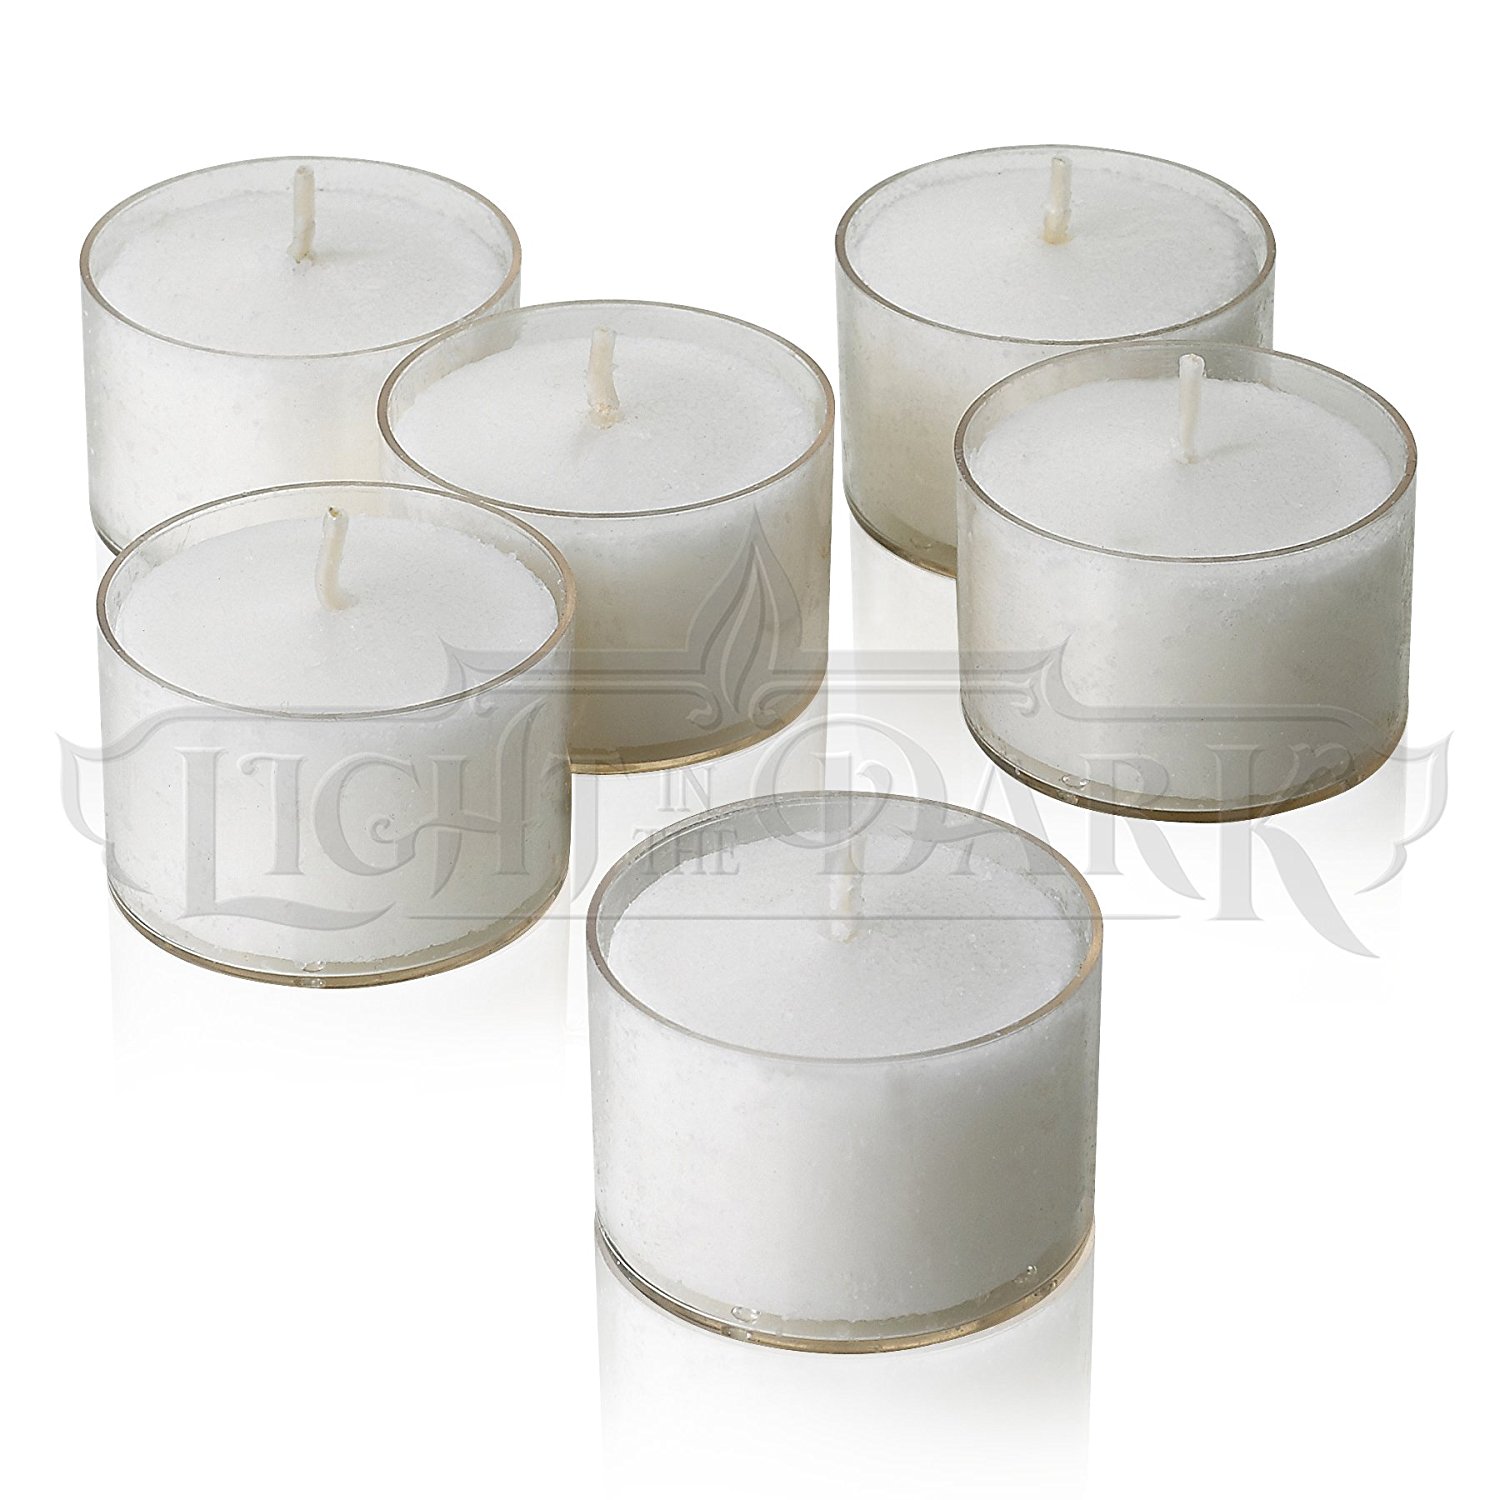 Amazon.com: White Tealight Candles with Clear Cup - Set of 36 ...